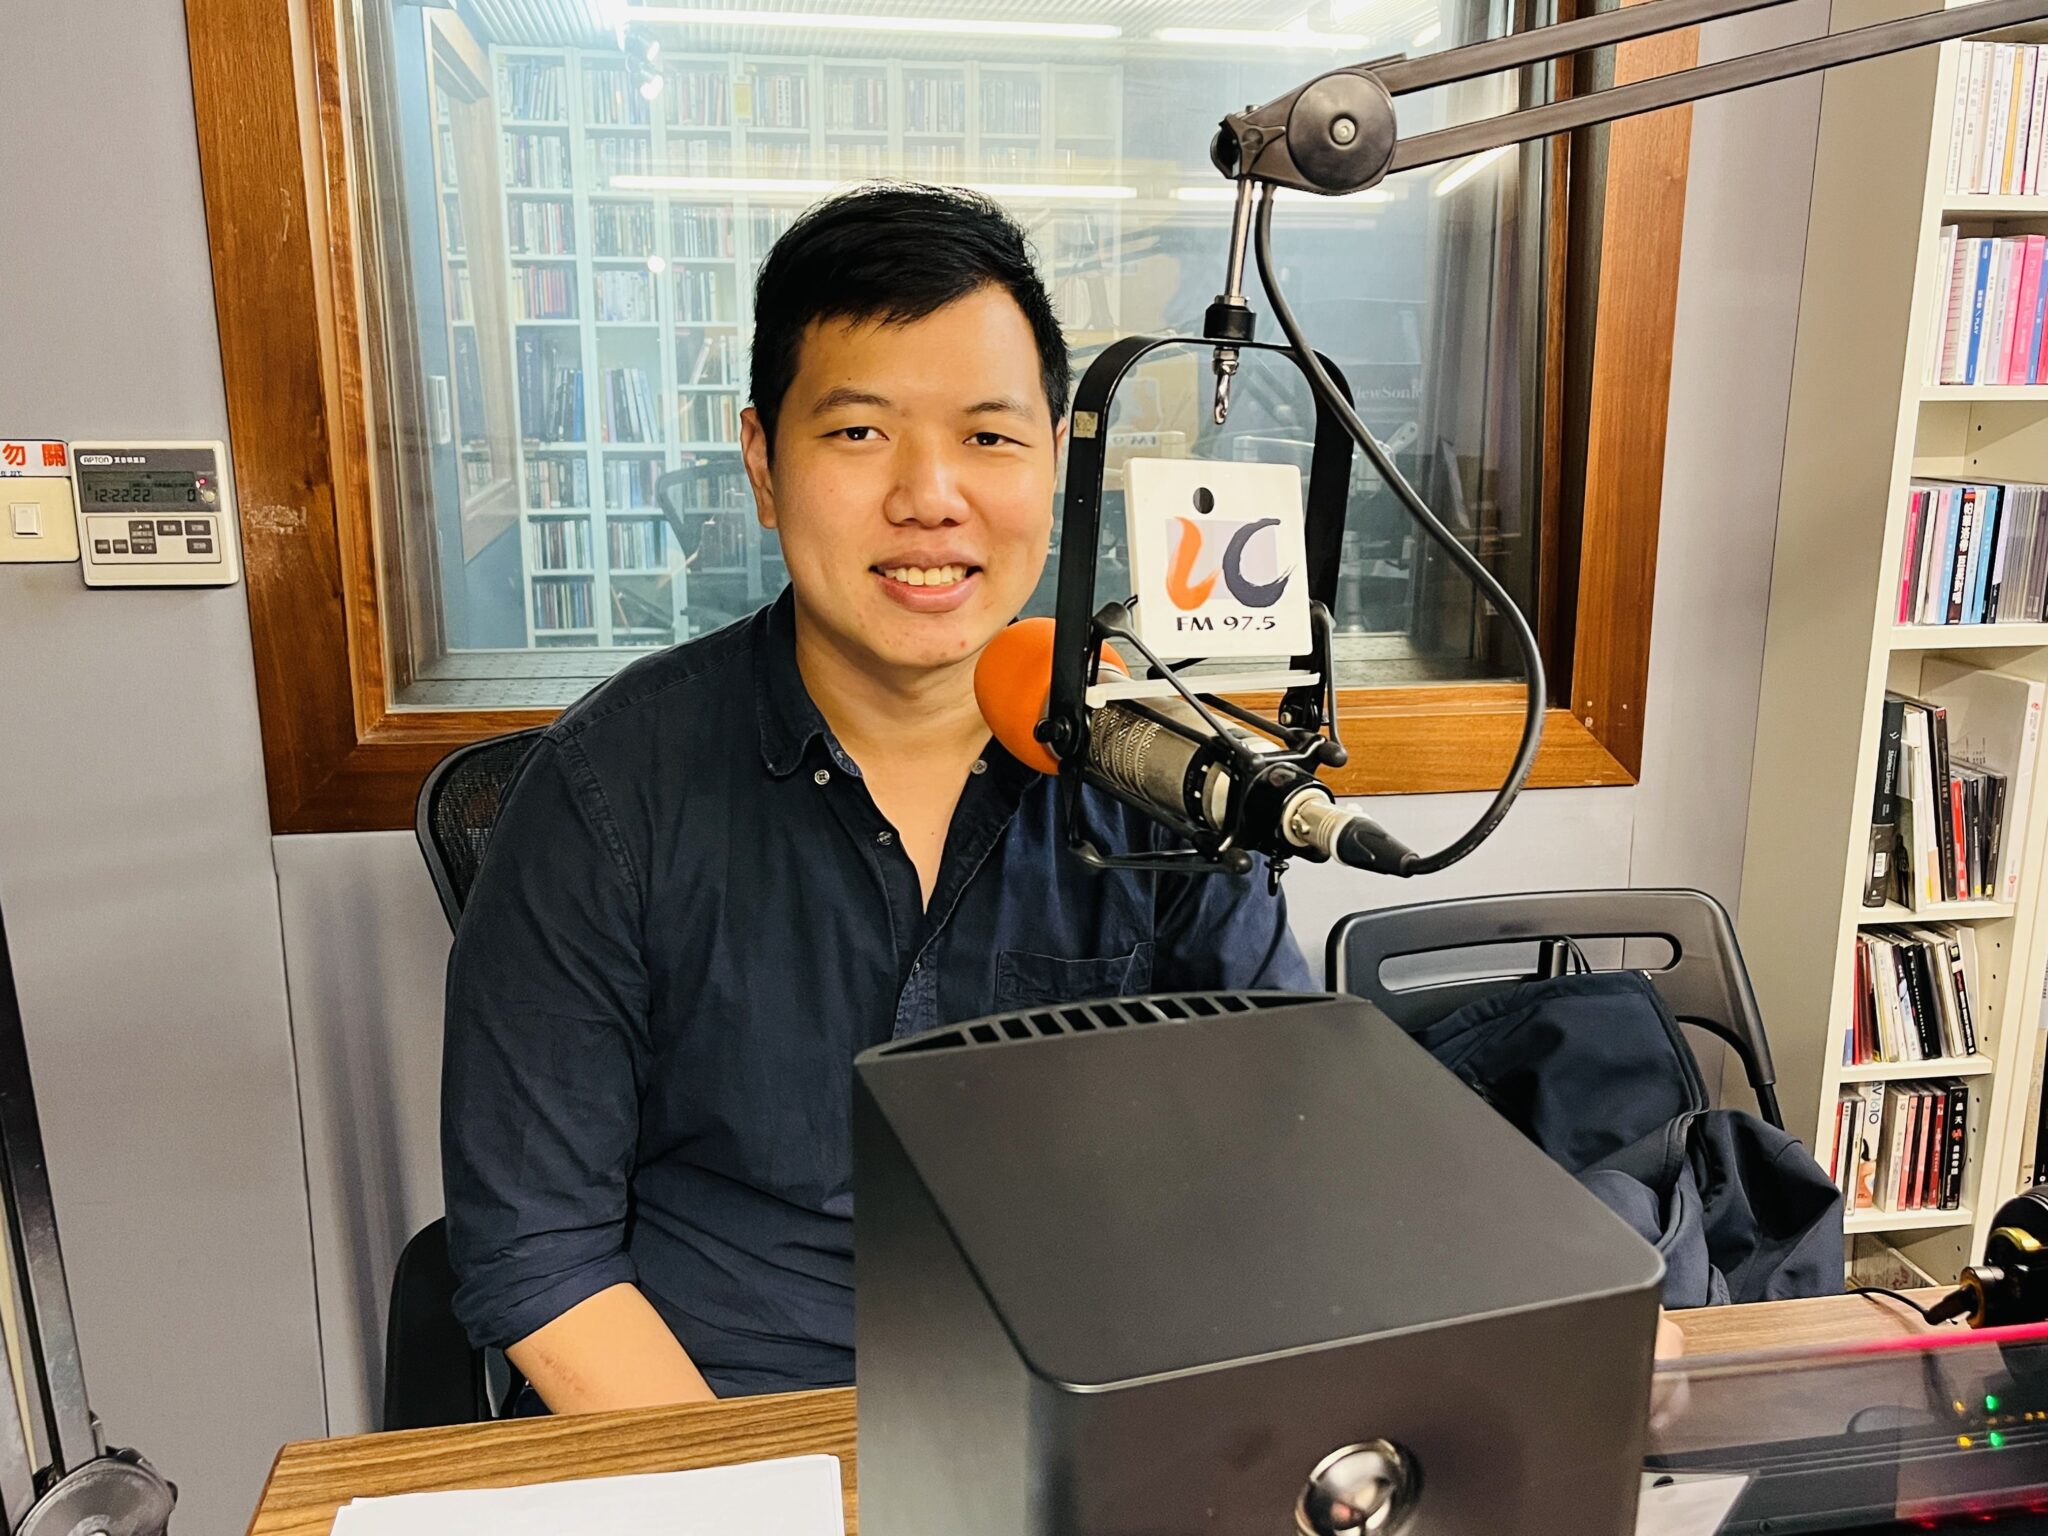 Lu Wei Chen shared about founding an organization that provides the largest “African Information Platform” in Taiwan. (Photo / Provided by Lu Wei Chen)